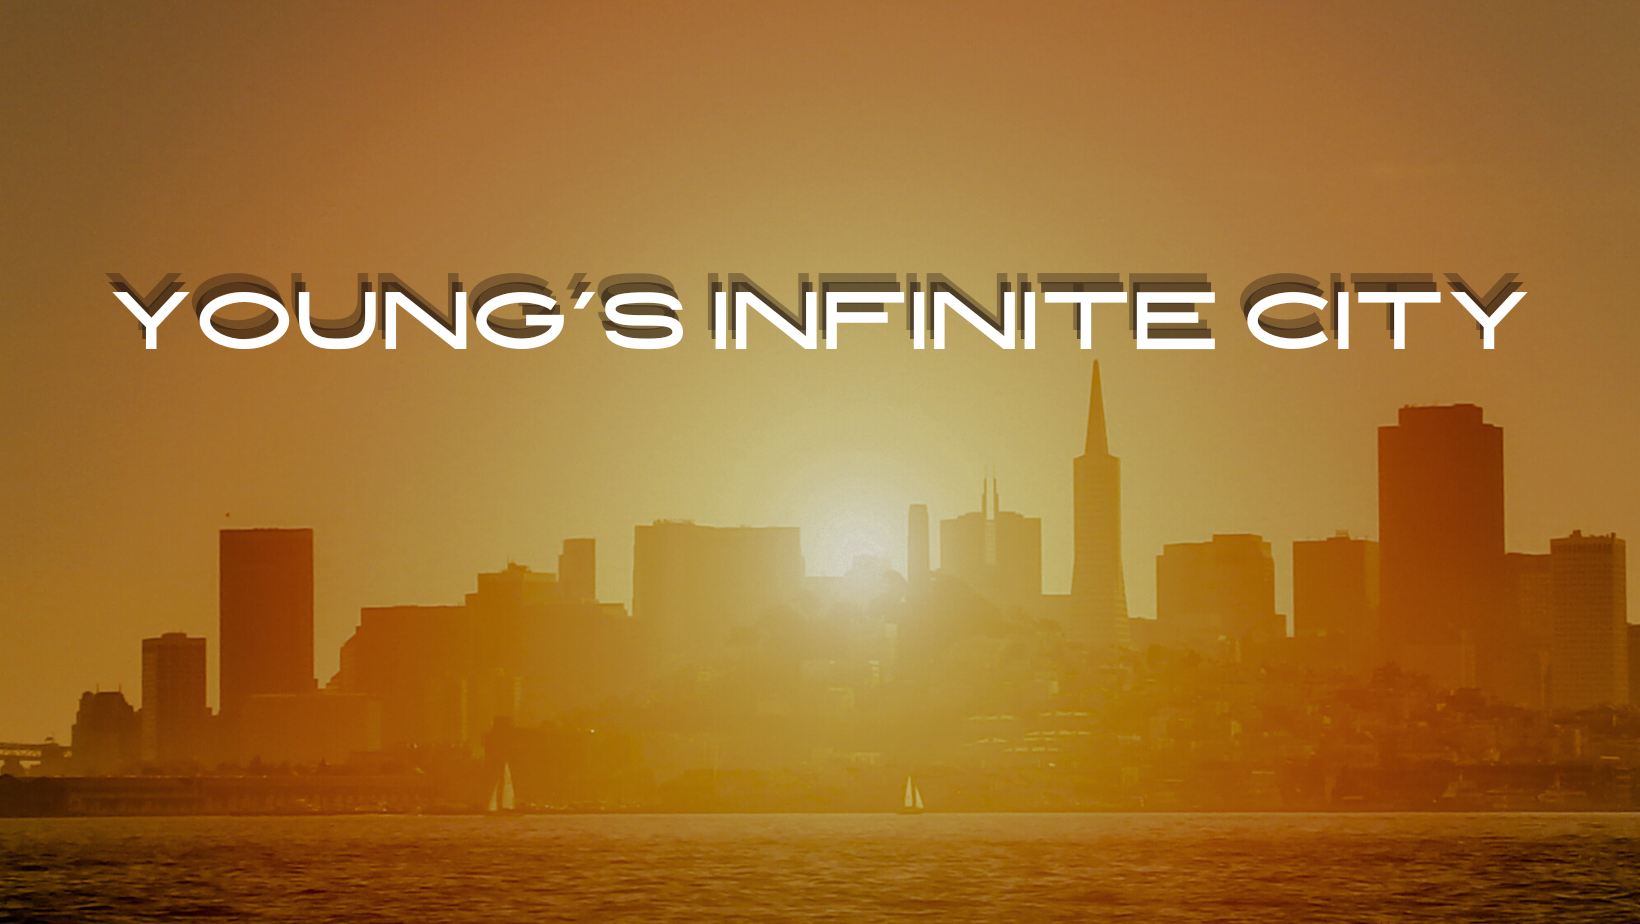 YOUNG’S INFINITE CITY